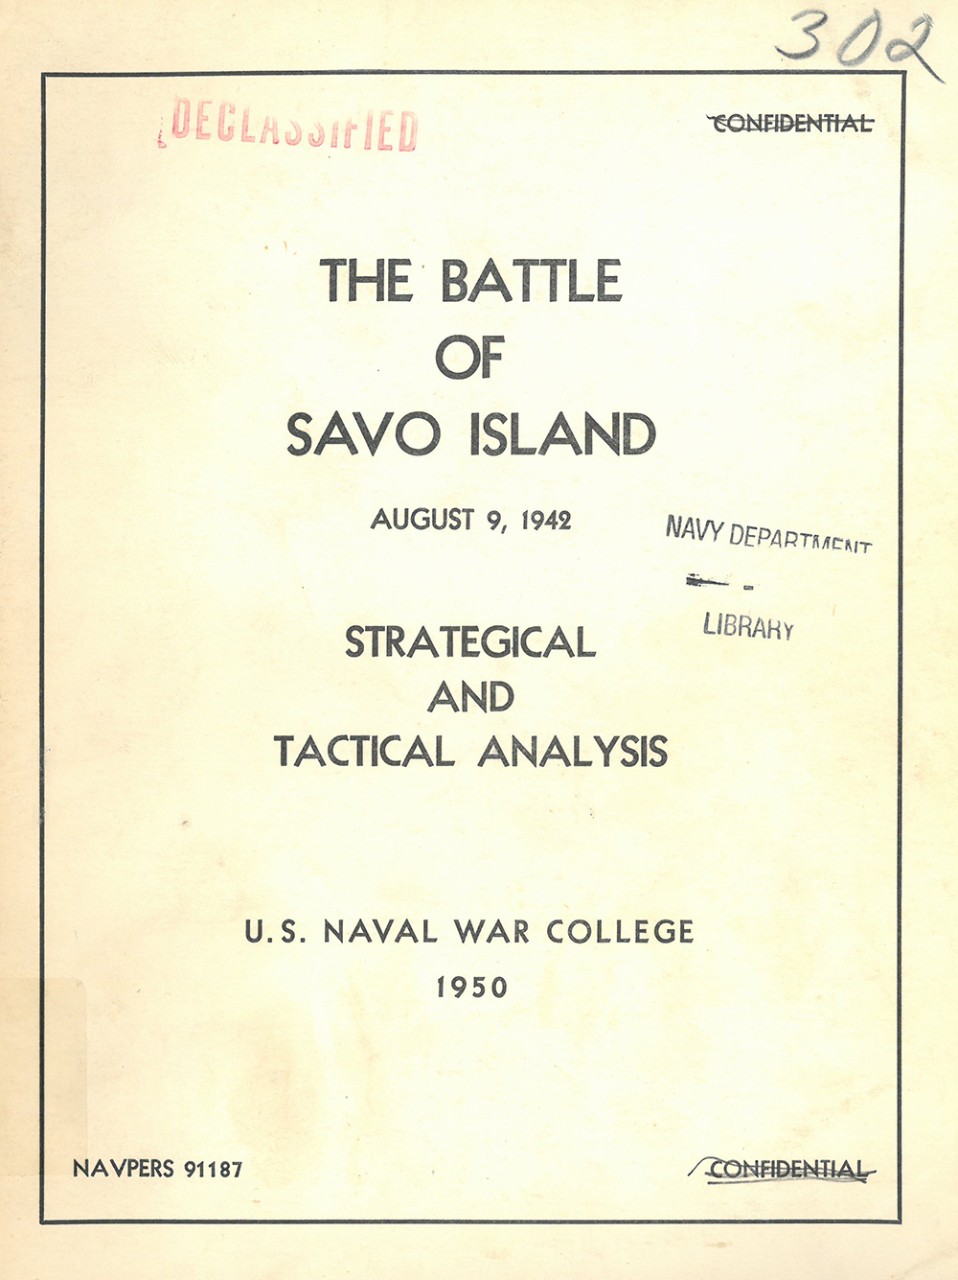 https://www.history.navy.mil/content/history/nhhc/research/library/online-reading-room/title-list-alphabetically/b/battle-savo-island-strat-tact-analysis/_jcr_content/body/media_asset_1865594589/image.img.jpg/1491478575387.jpg